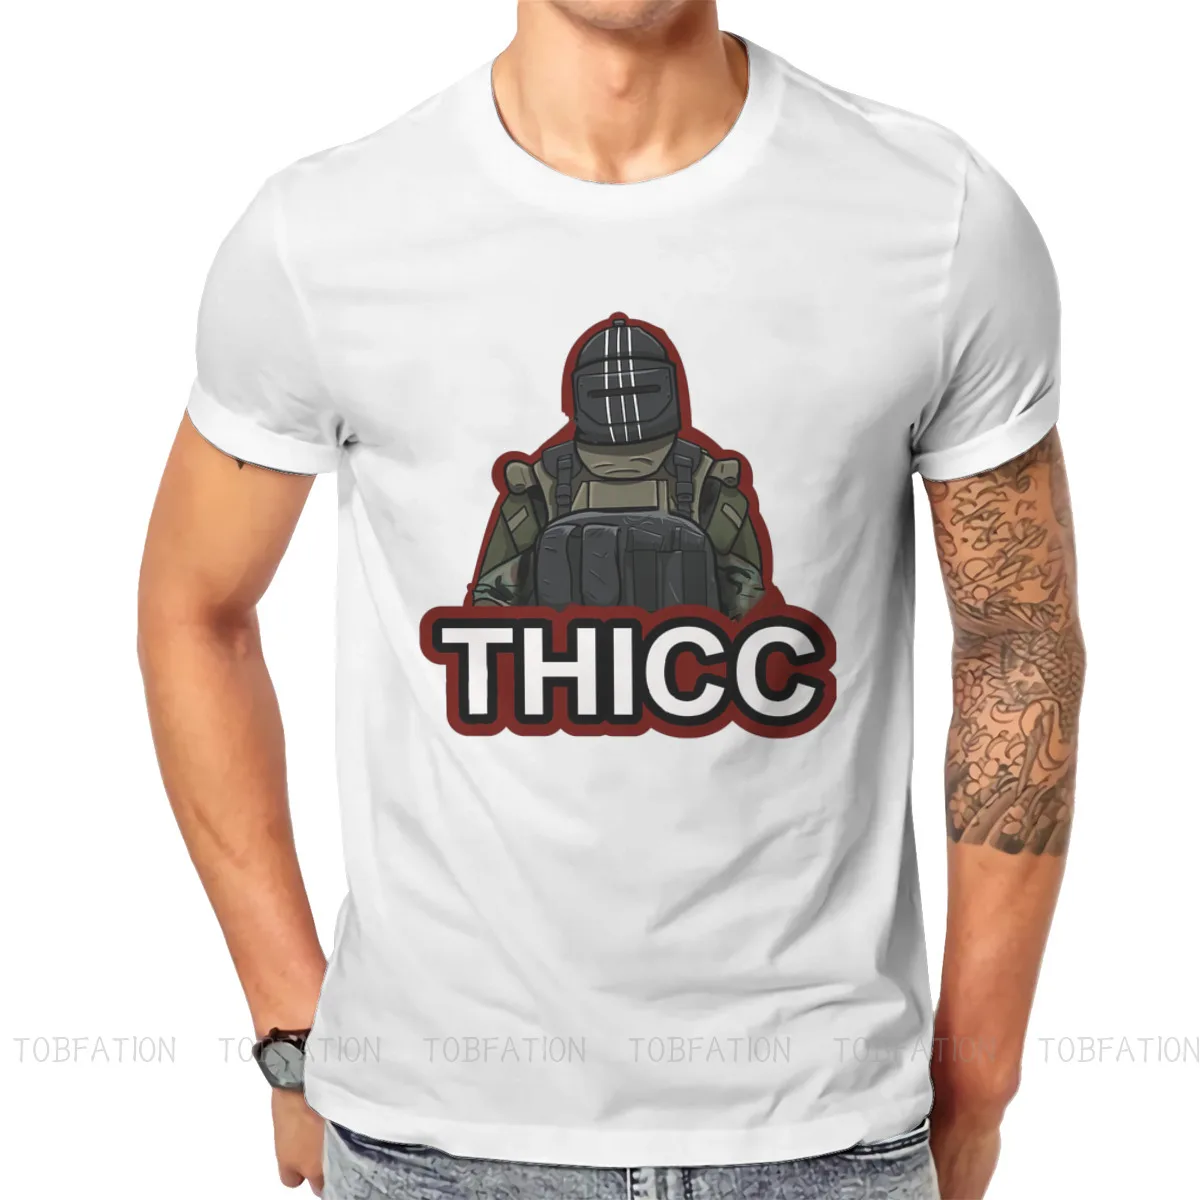 

THICC Newest TShirts Escape From Tarkov BEAR USEC Scavs Game Male Graphic Pure Cotton Streetwear T Shirt O Neck Big Size